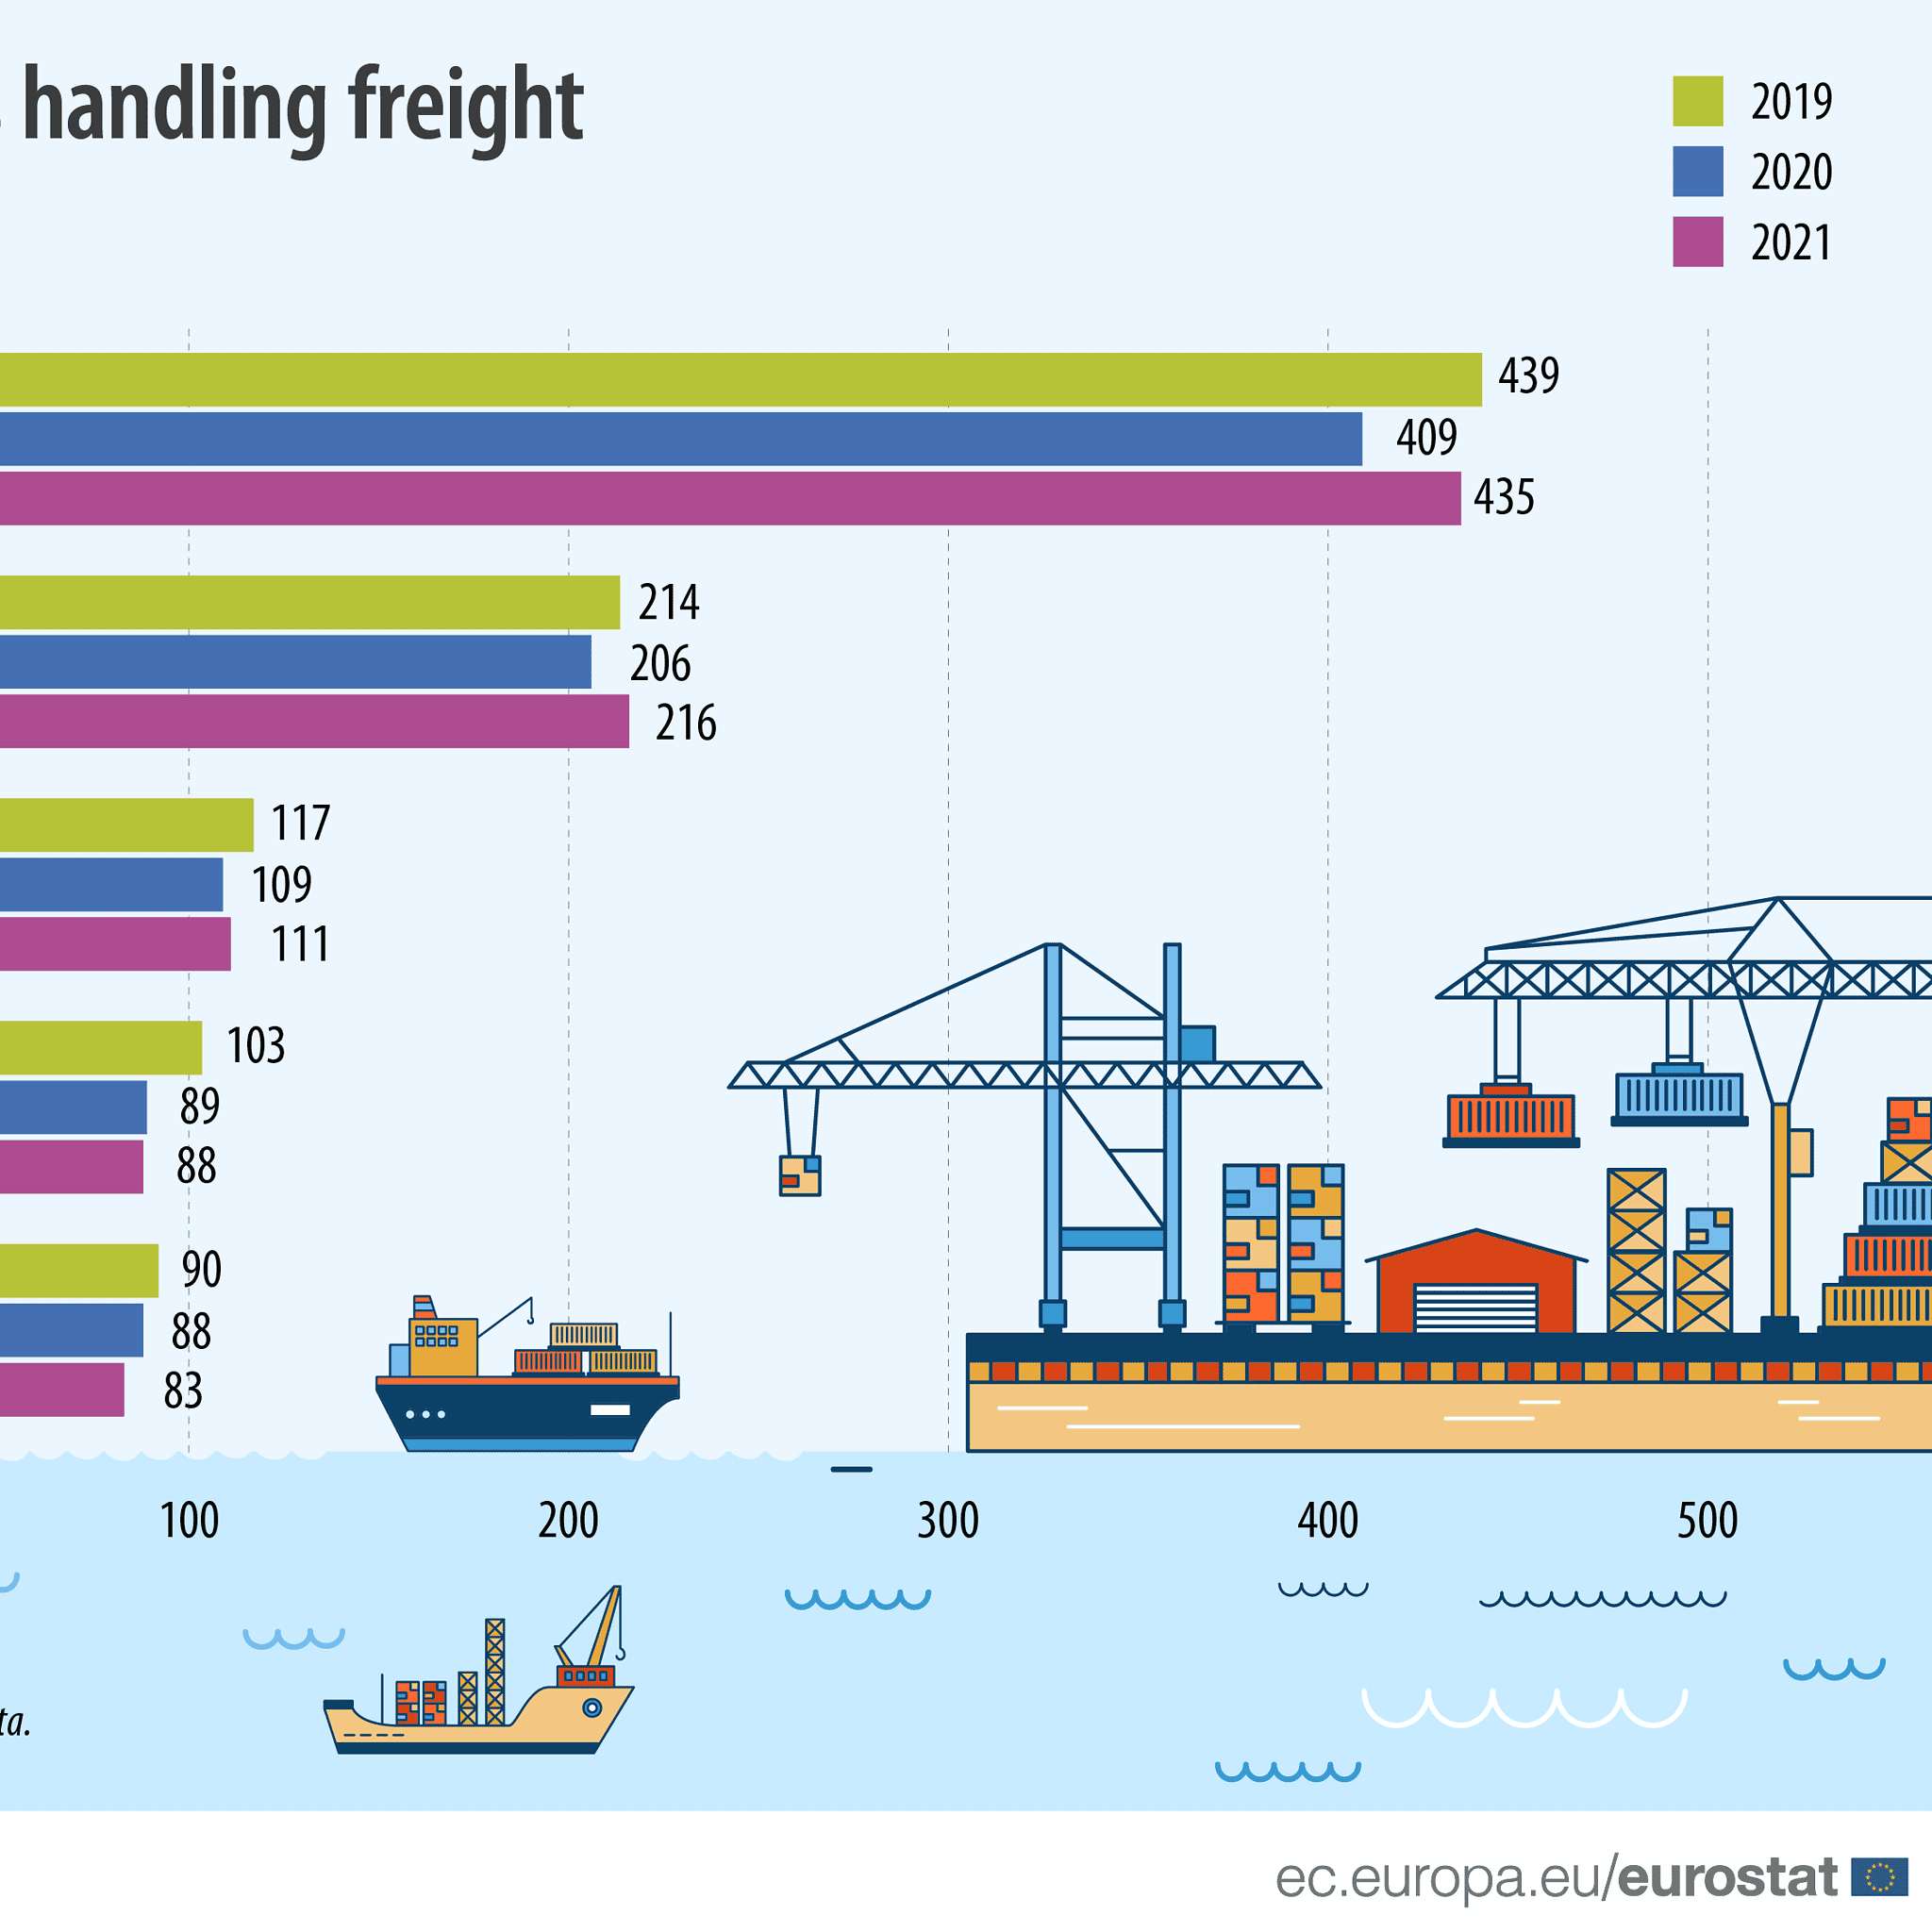 Maritime freight top 5 ports